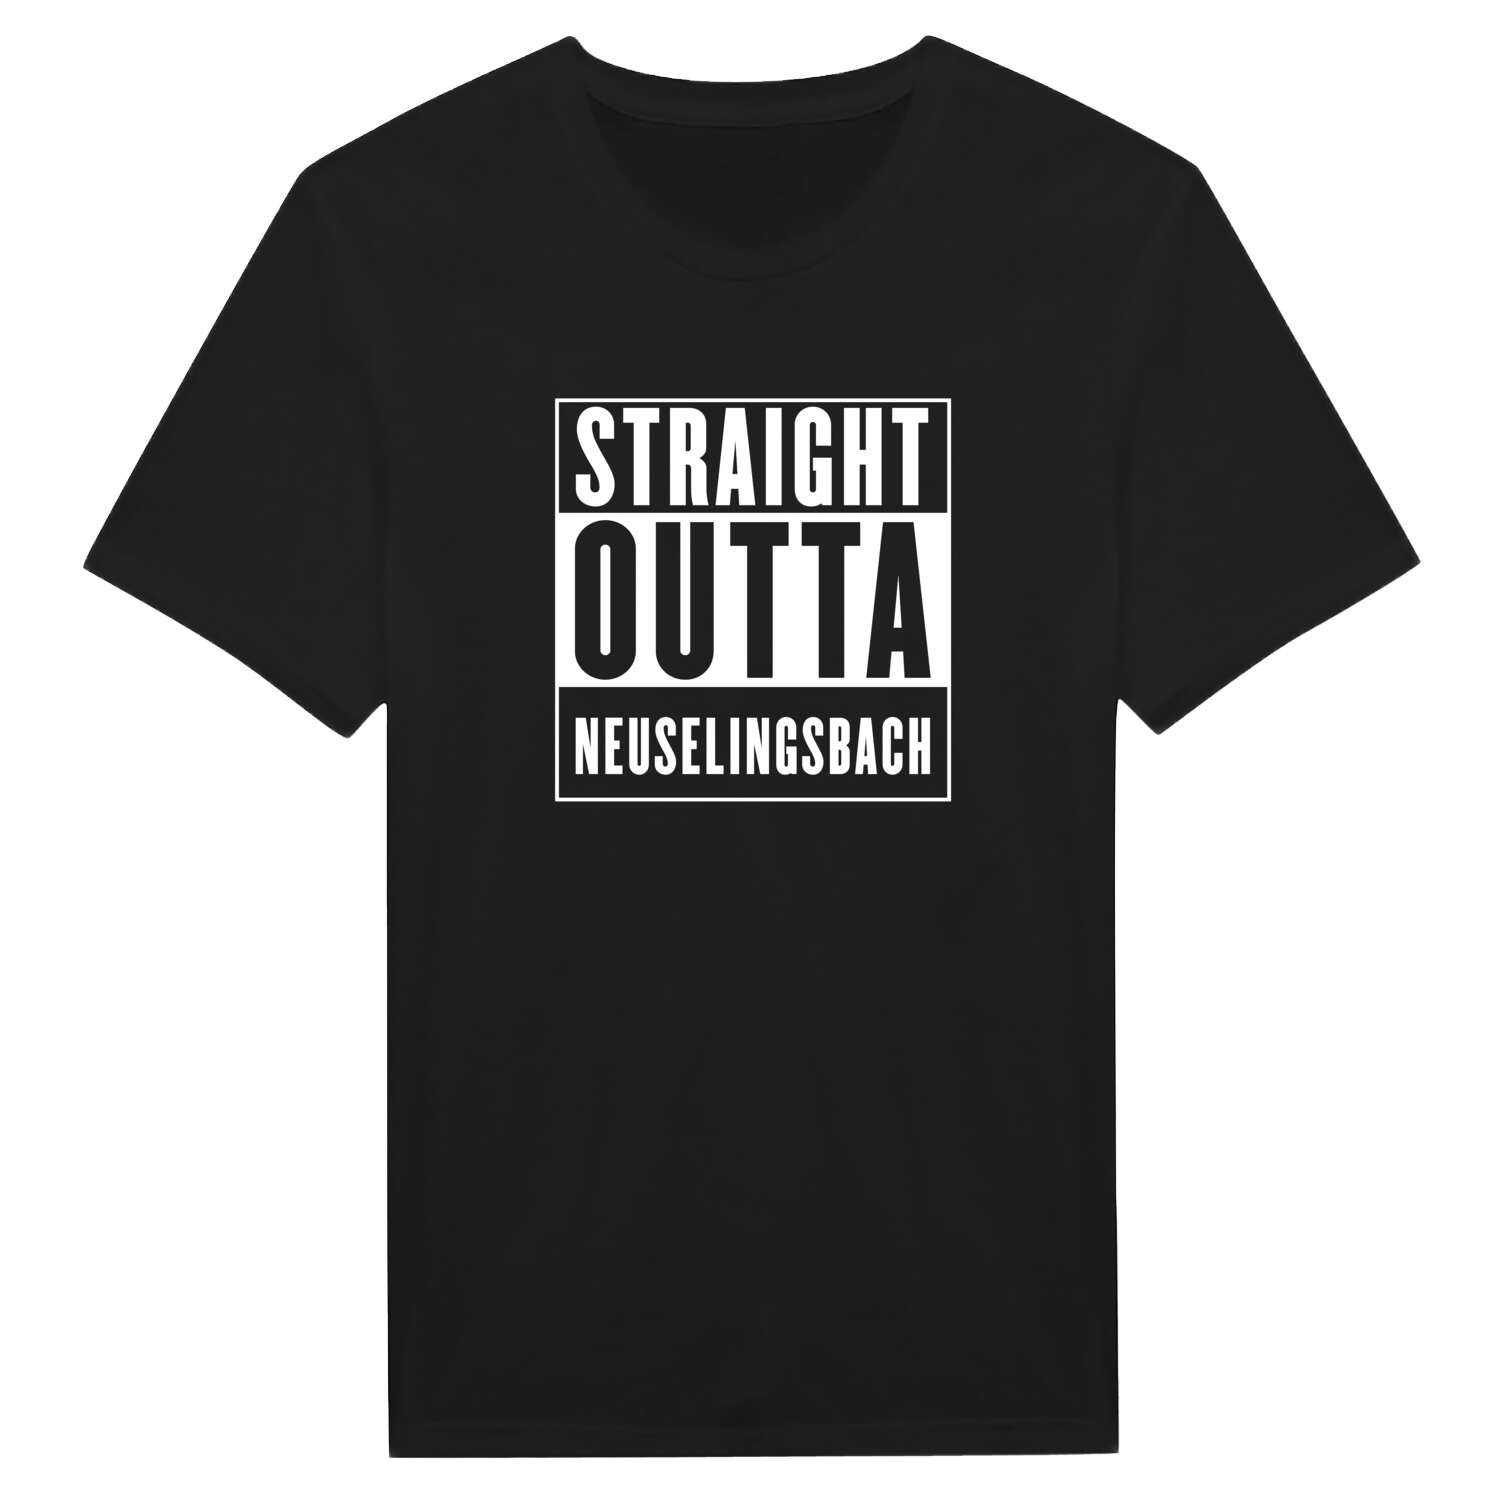 Neuselingsbach T-Shirt »Straight Outta«